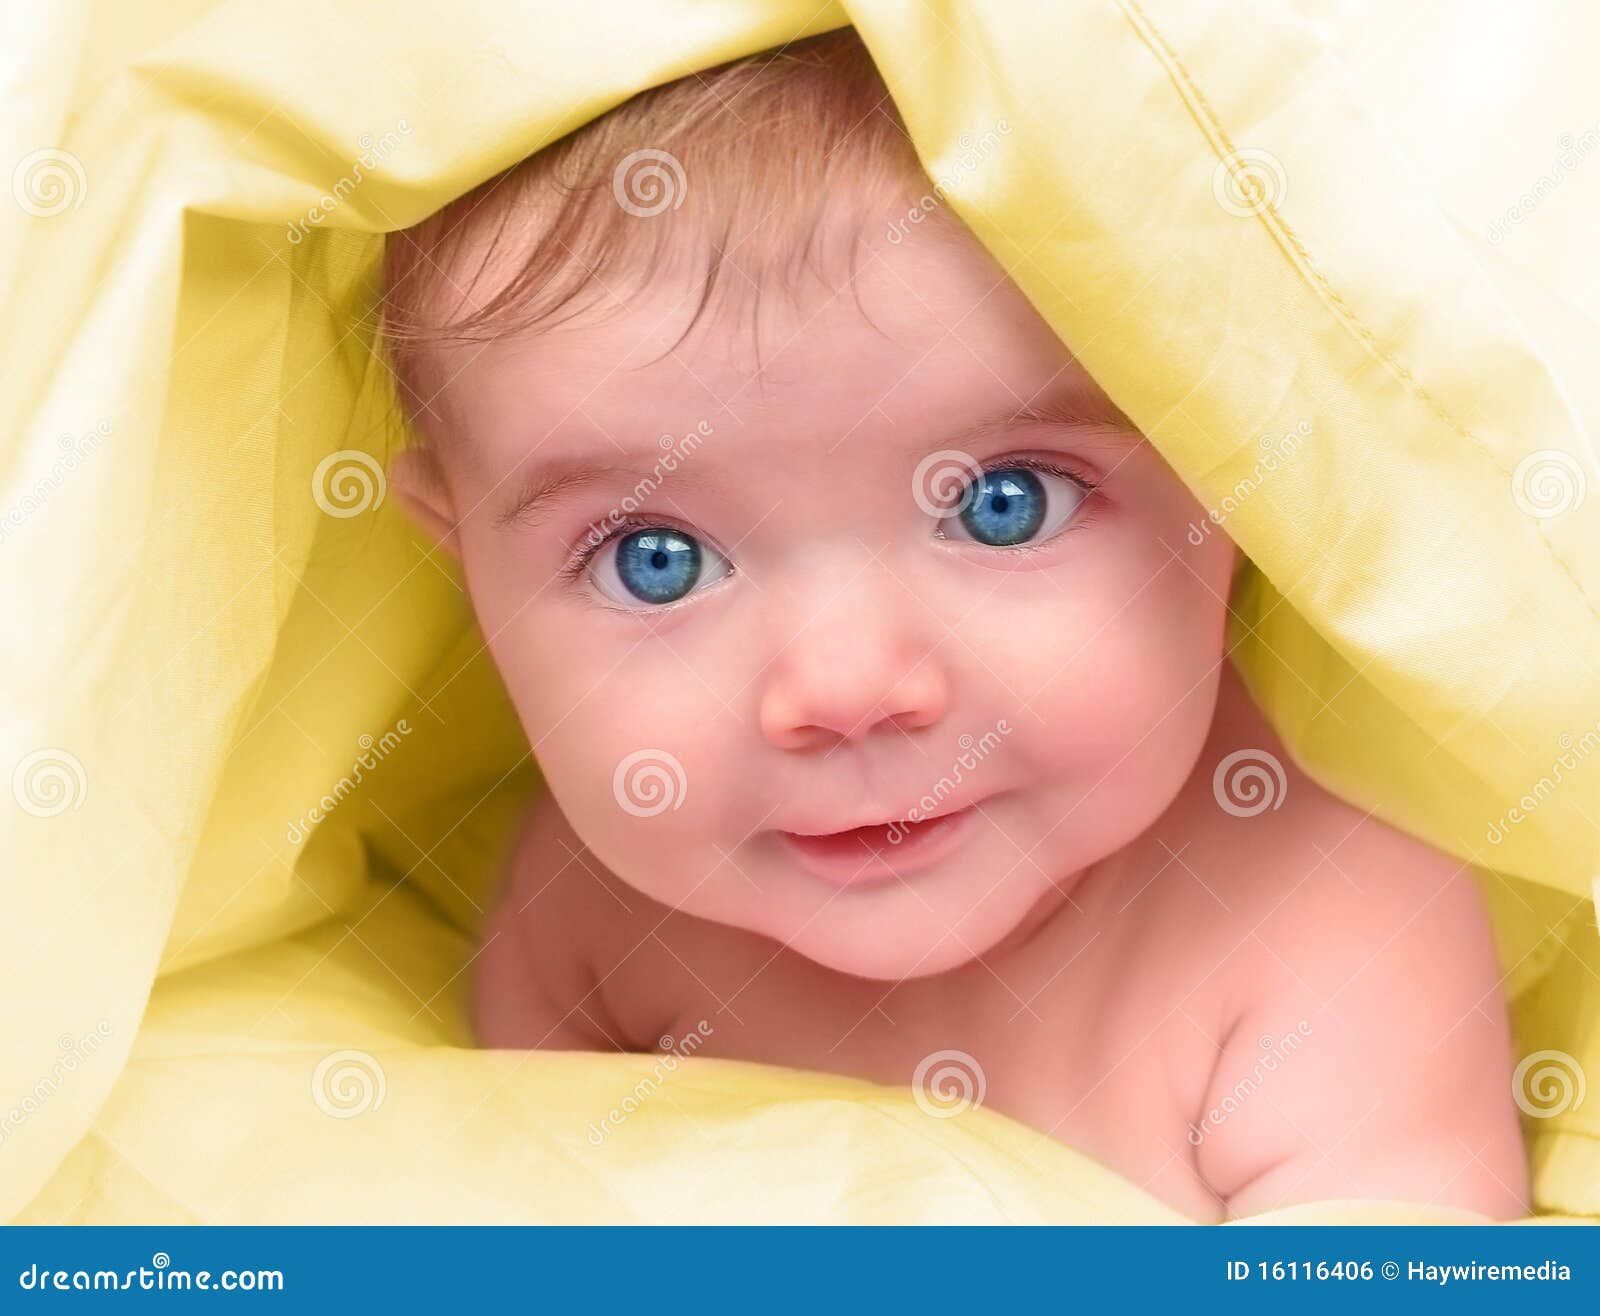 Beautiful Little Baby On Yellow Close Up Royalty Free ...